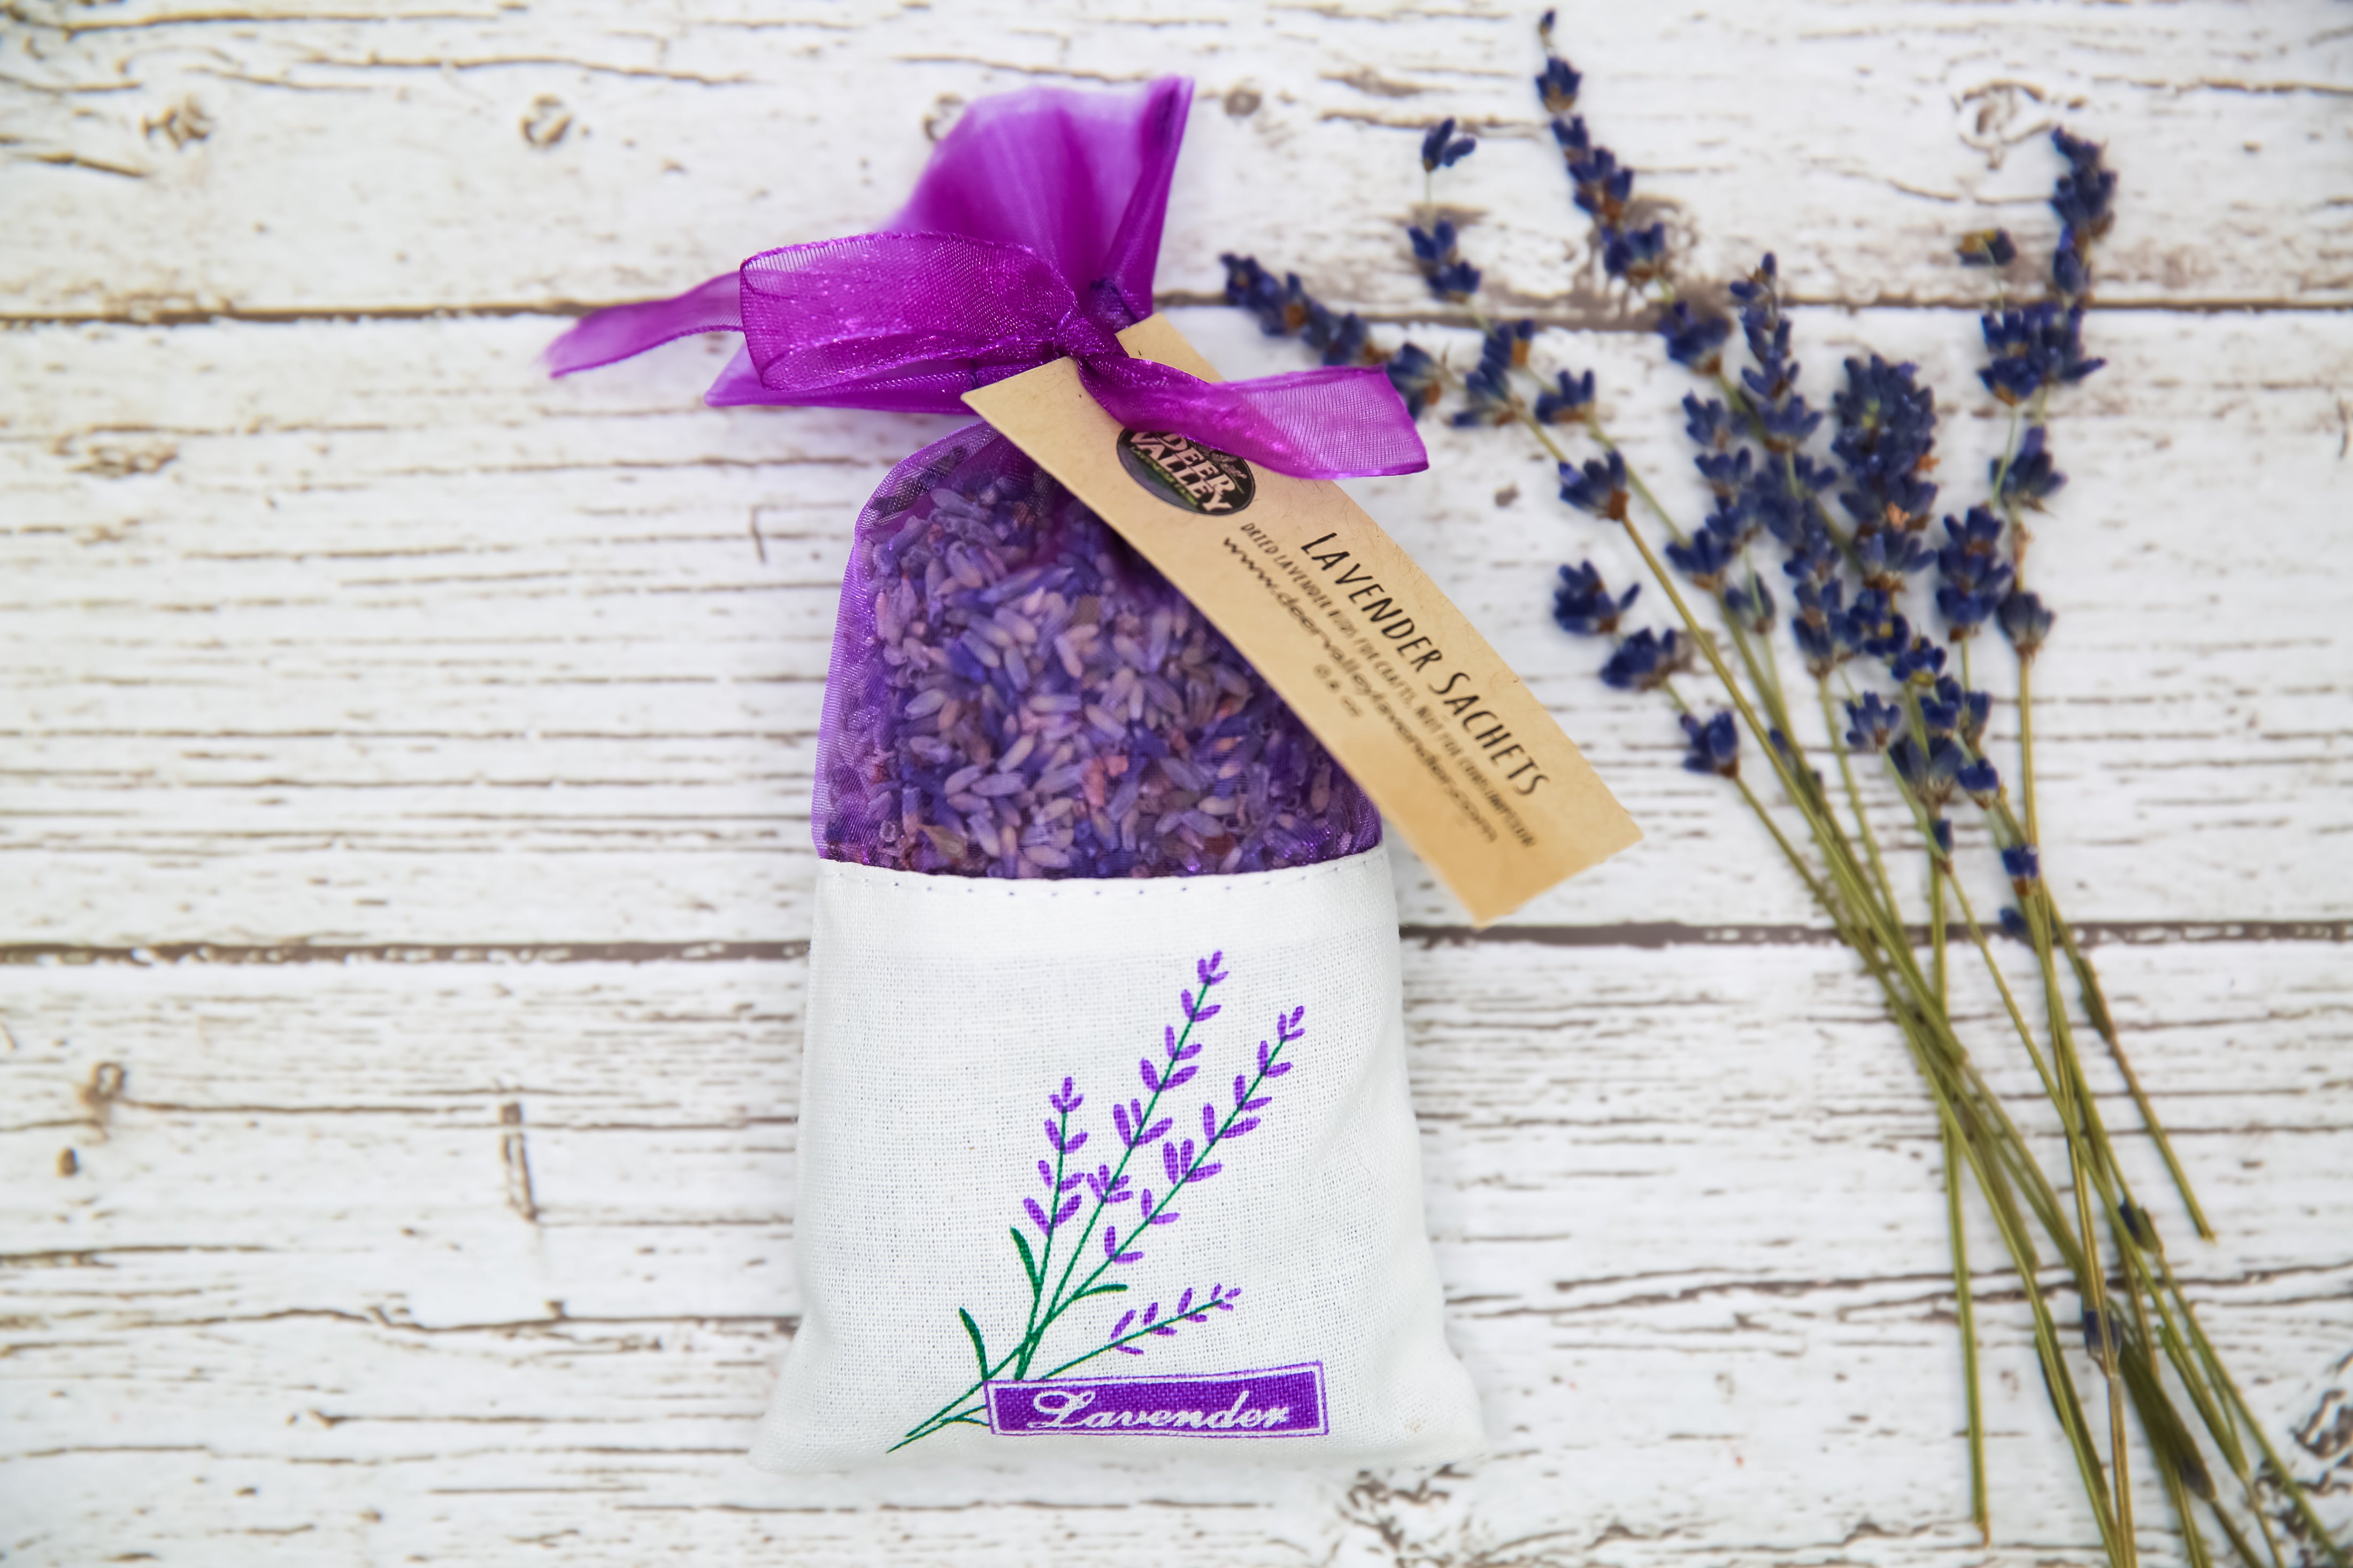 Dried Lavender bundle - Buy lavender direct from the farm!